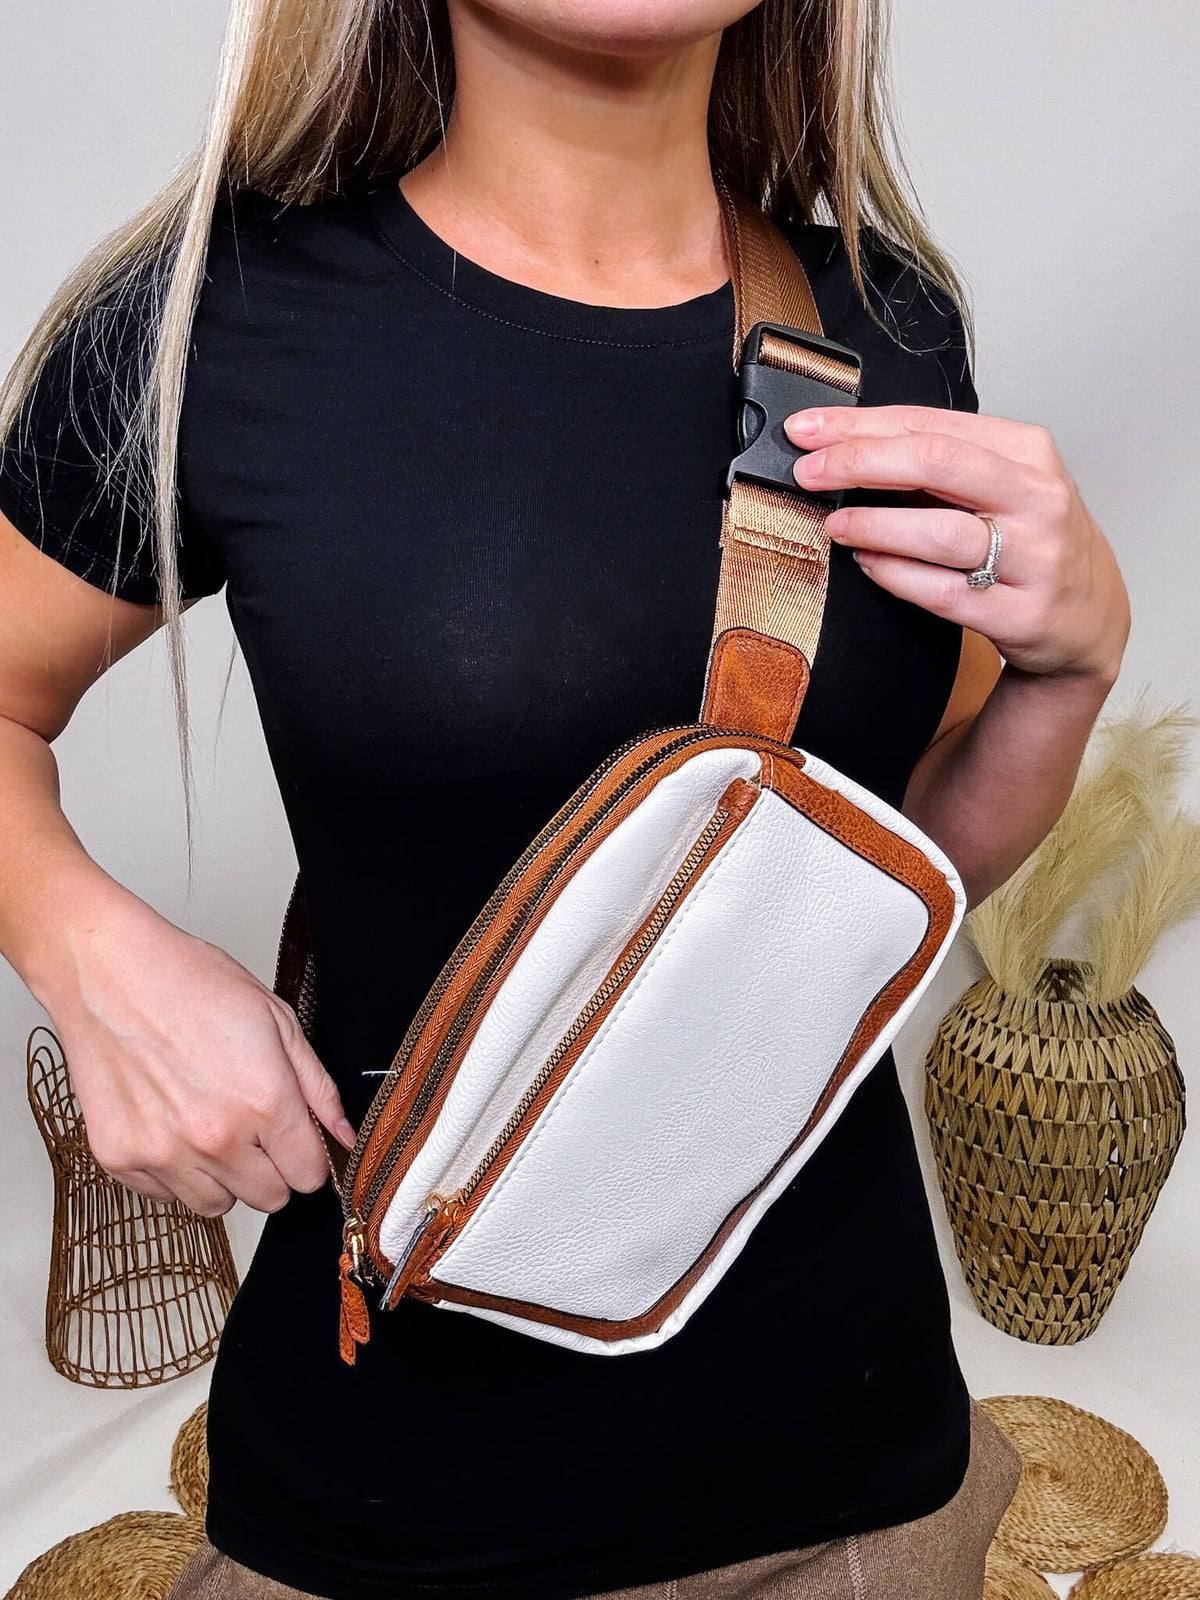 White and Brown Faux Leather Mineral Washed Sling Cross Body Bag Front Pocket  Adjustable Buckle Strap Full Double Zip Closure Lined With Internal Mesh Pockets Approximately 8"W x 5.75"H x 2.25"D Material: PU